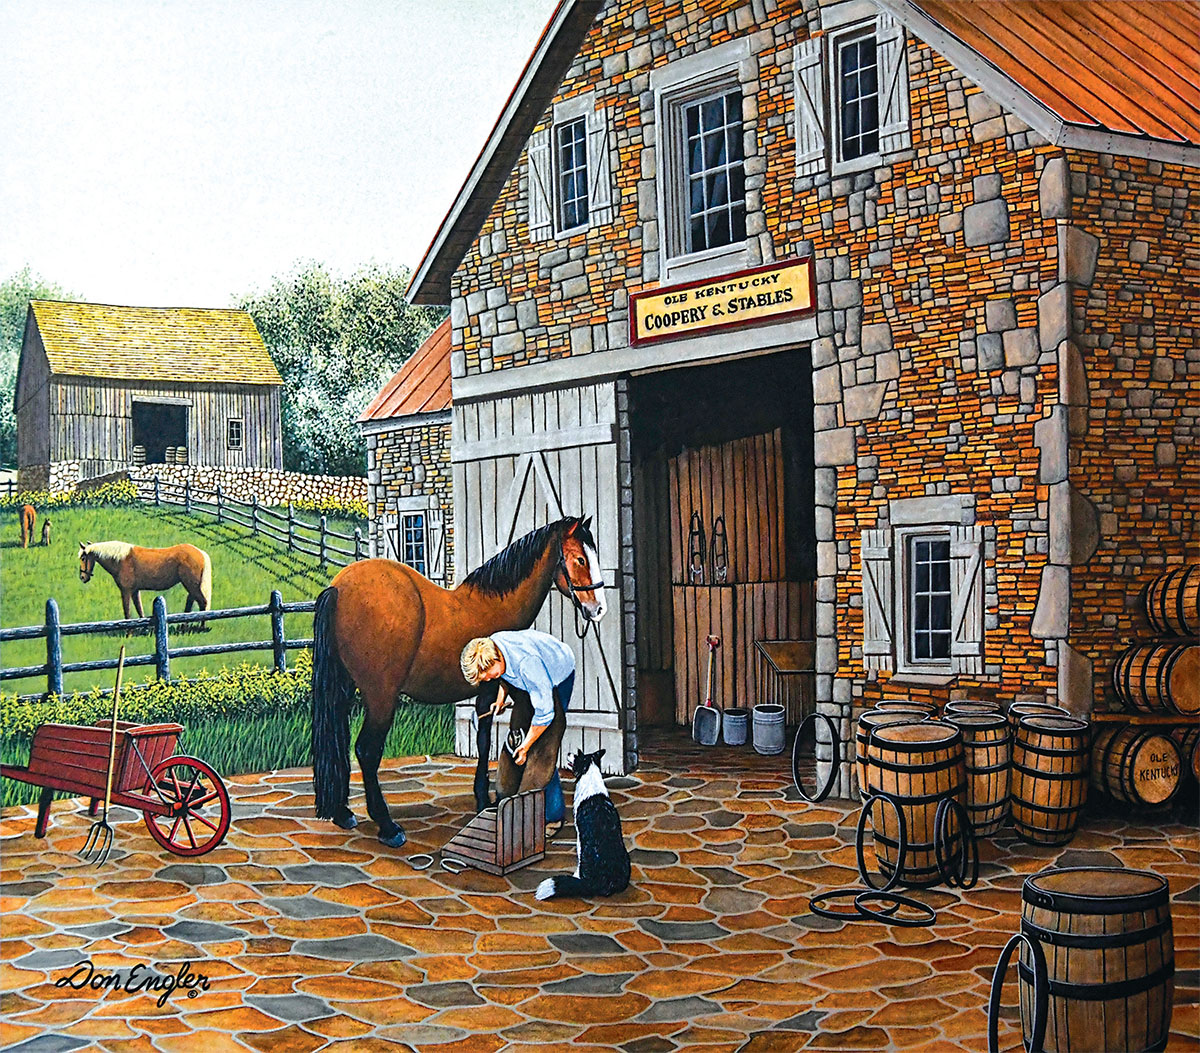 Coopery and Stables Farm Jigsaw Puzzle